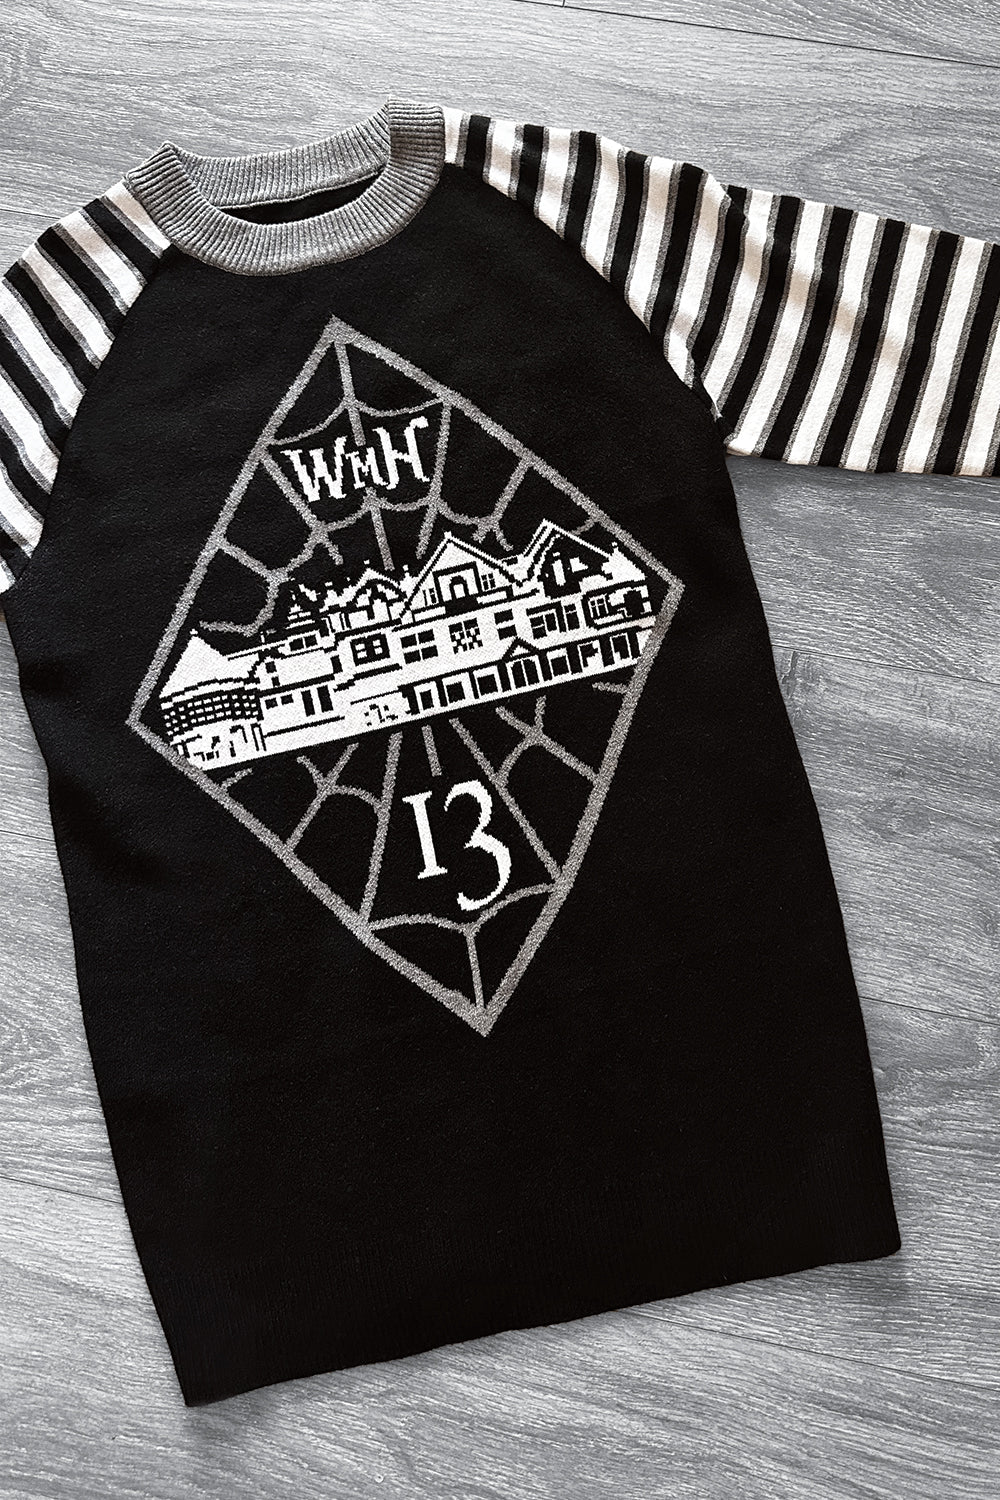 WMH Spiderweb 13 Sweater Black with Stripe Sleeves